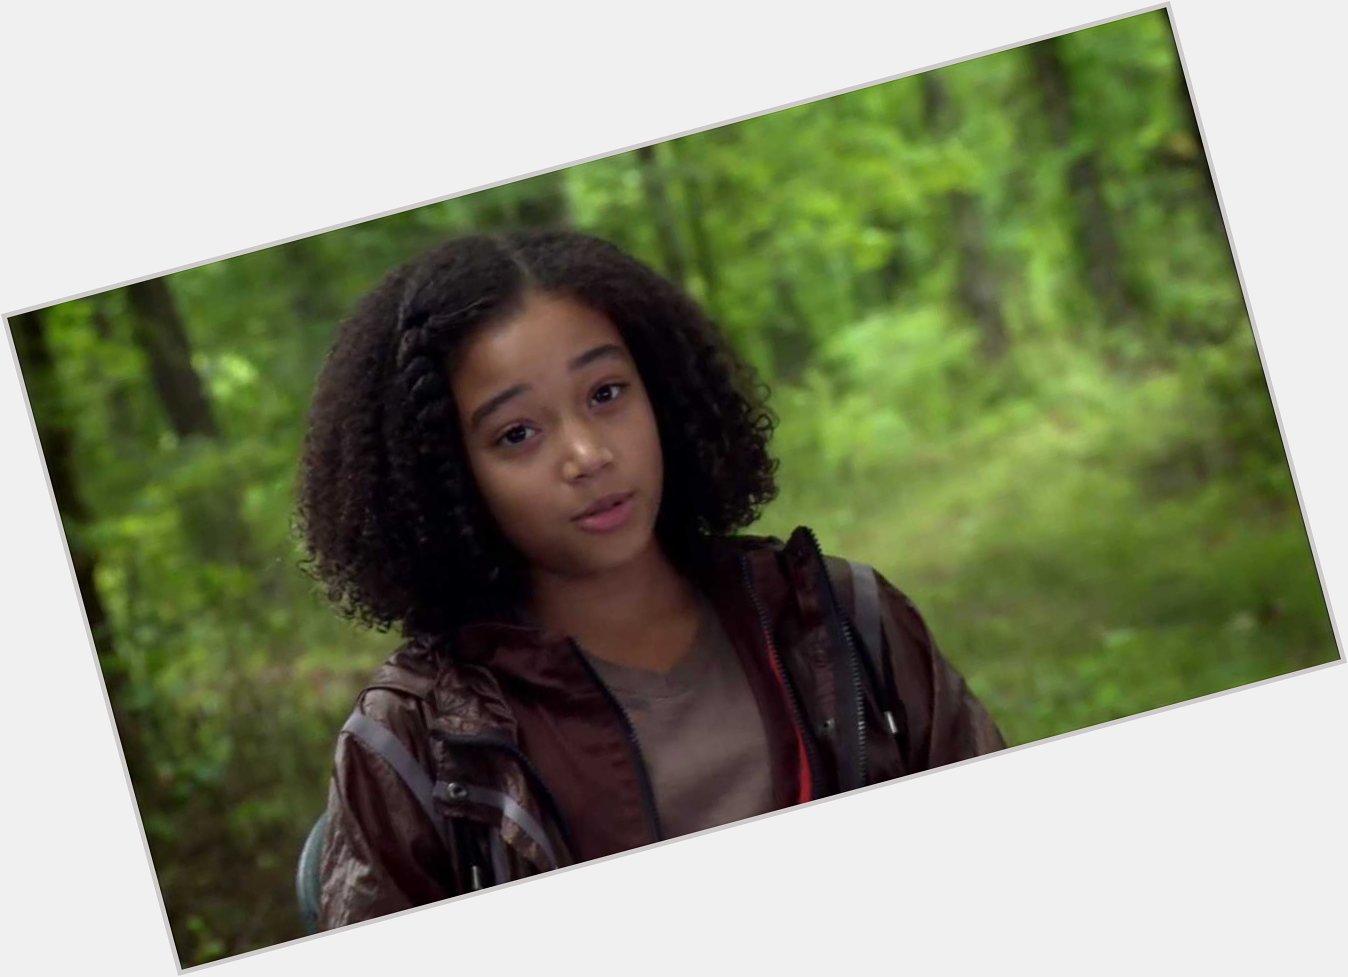 Happy 22nd birthday to Amandla Stenberg!

What\s your favorite role of hers? 